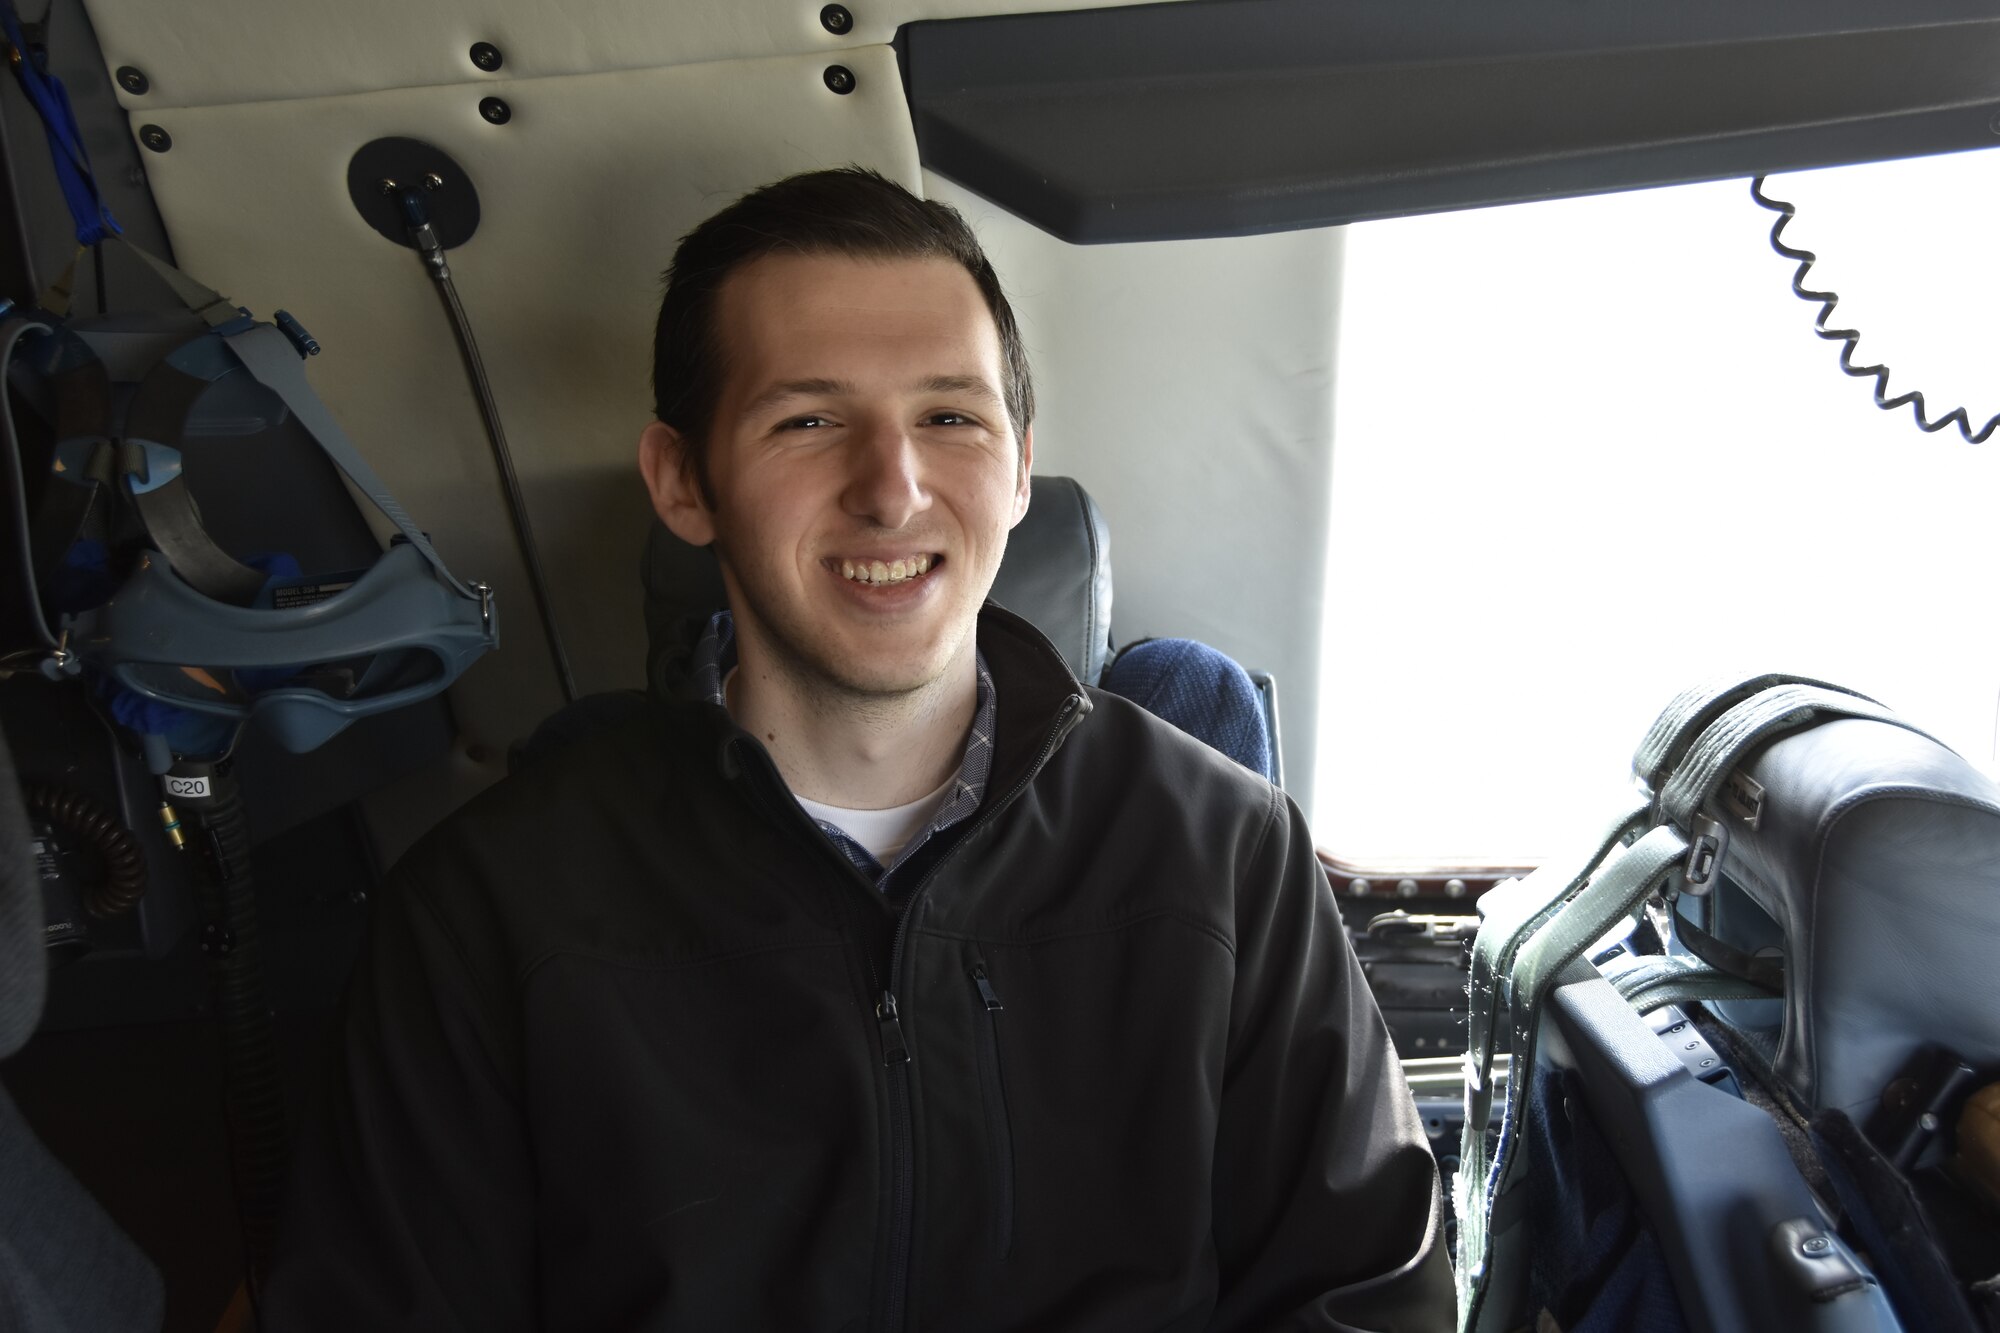 A civilian contractor from Hanscom Air Force Base, Massachusetts is all smiles aboard a C-5 Galaxy